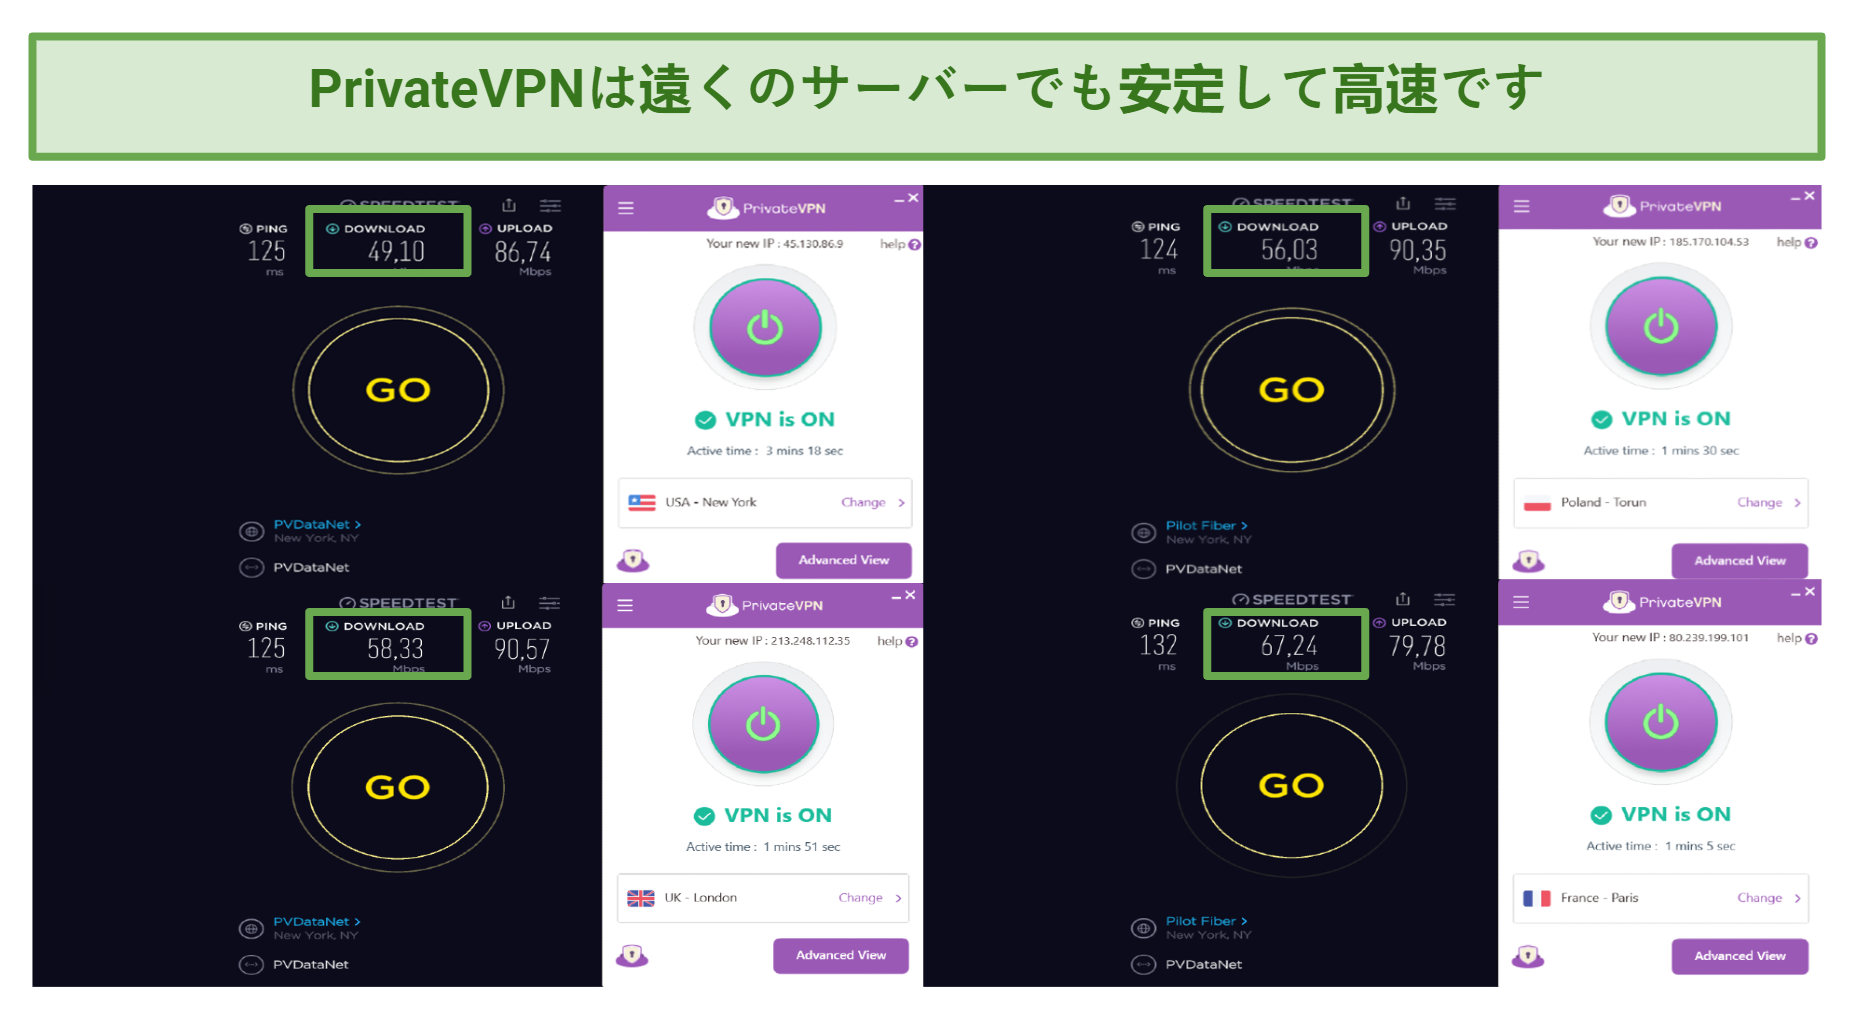 Screenshot of PrivateVPN's speed test results on servers in the US, Poland, UK, and France